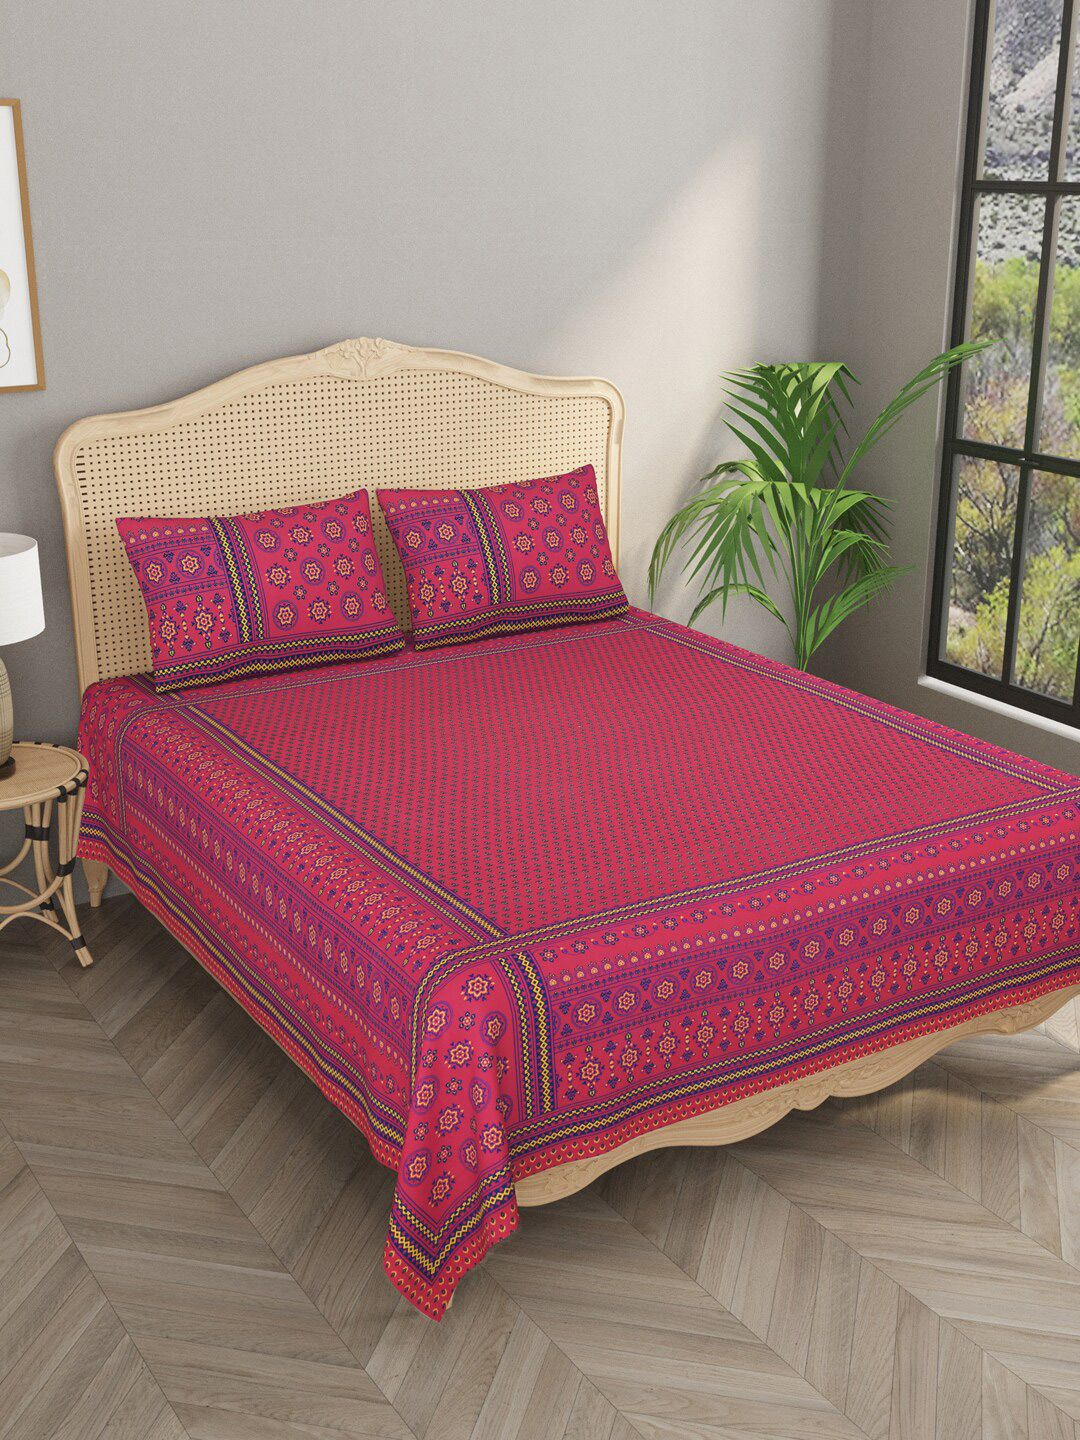 Gulaab Jaipur Pink & Purple Ethnic Motifs 400 TC King Bedsheet with 2 Pillow Covers Price in India